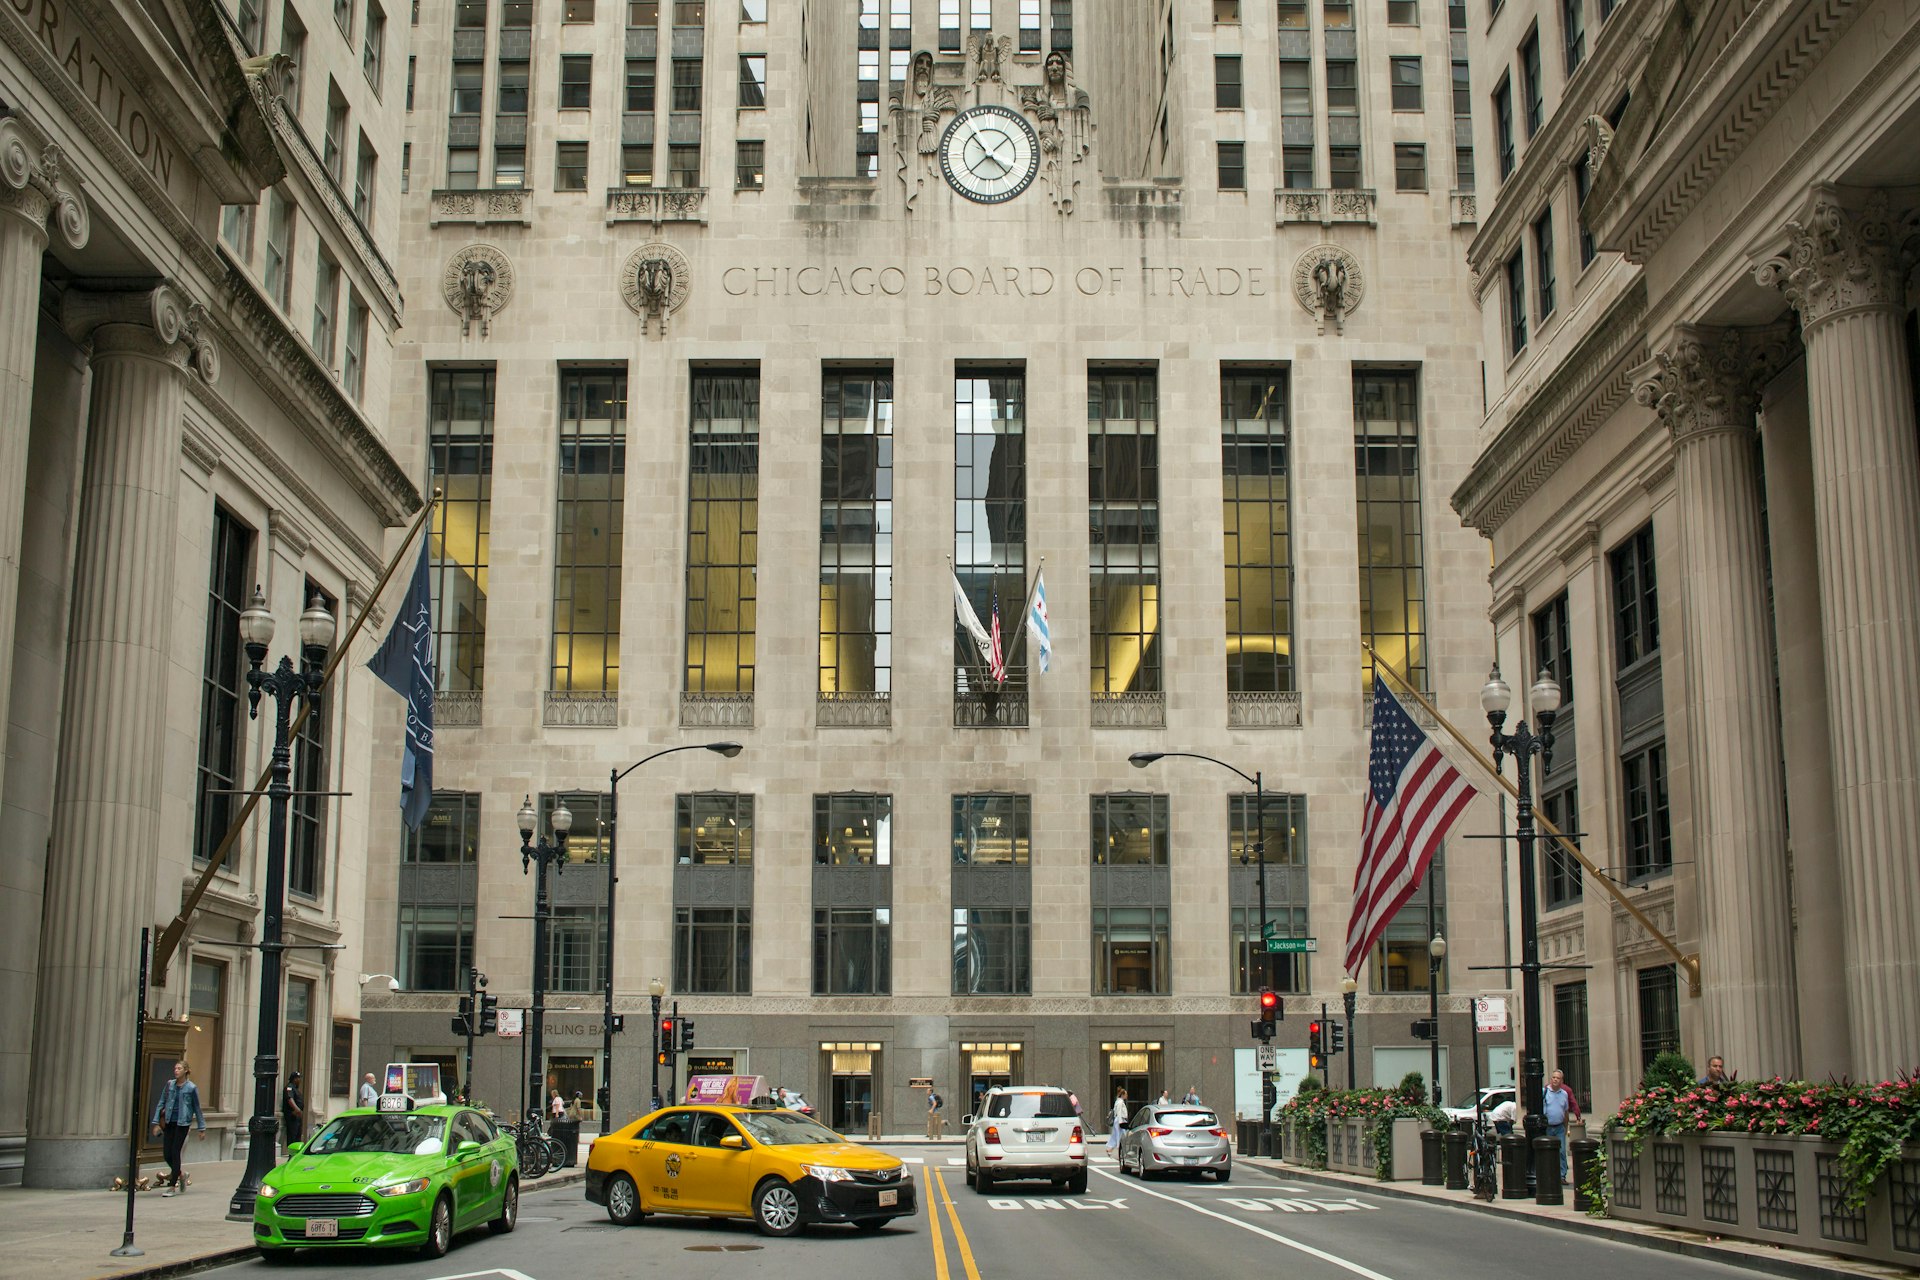 Facade of the Chicago Board of Trade with two colorful taxis and the US flag